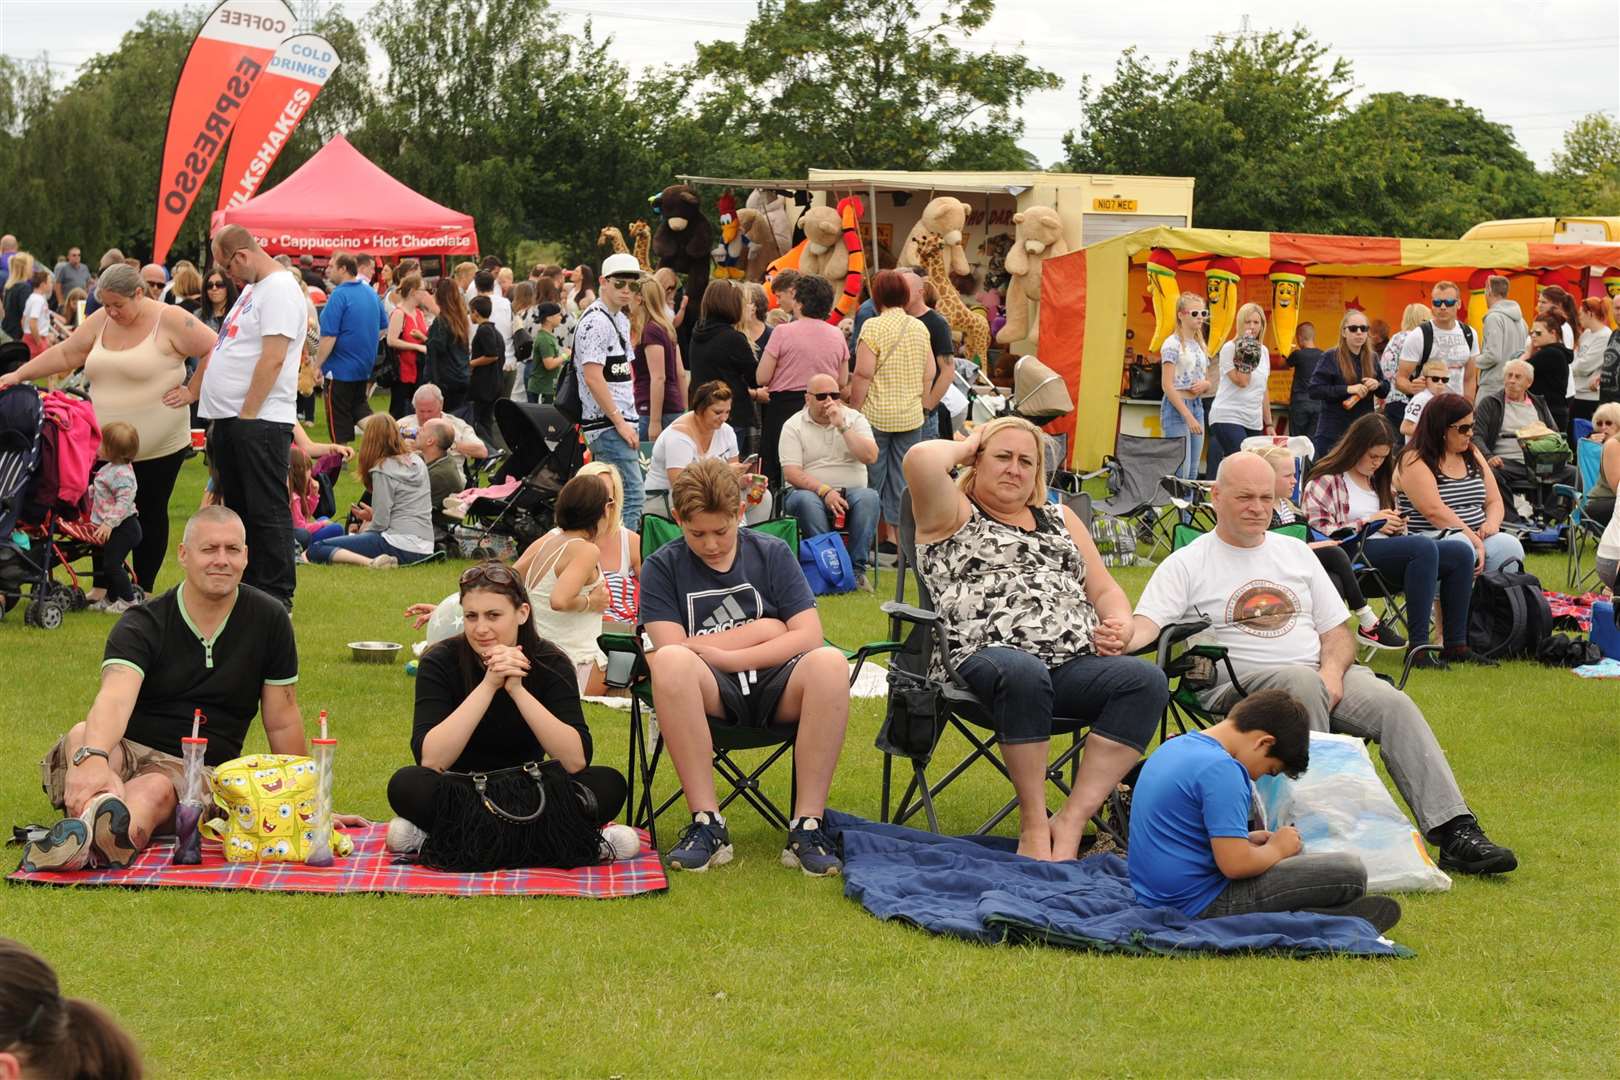 The summer fete at Stone Recreation Ground